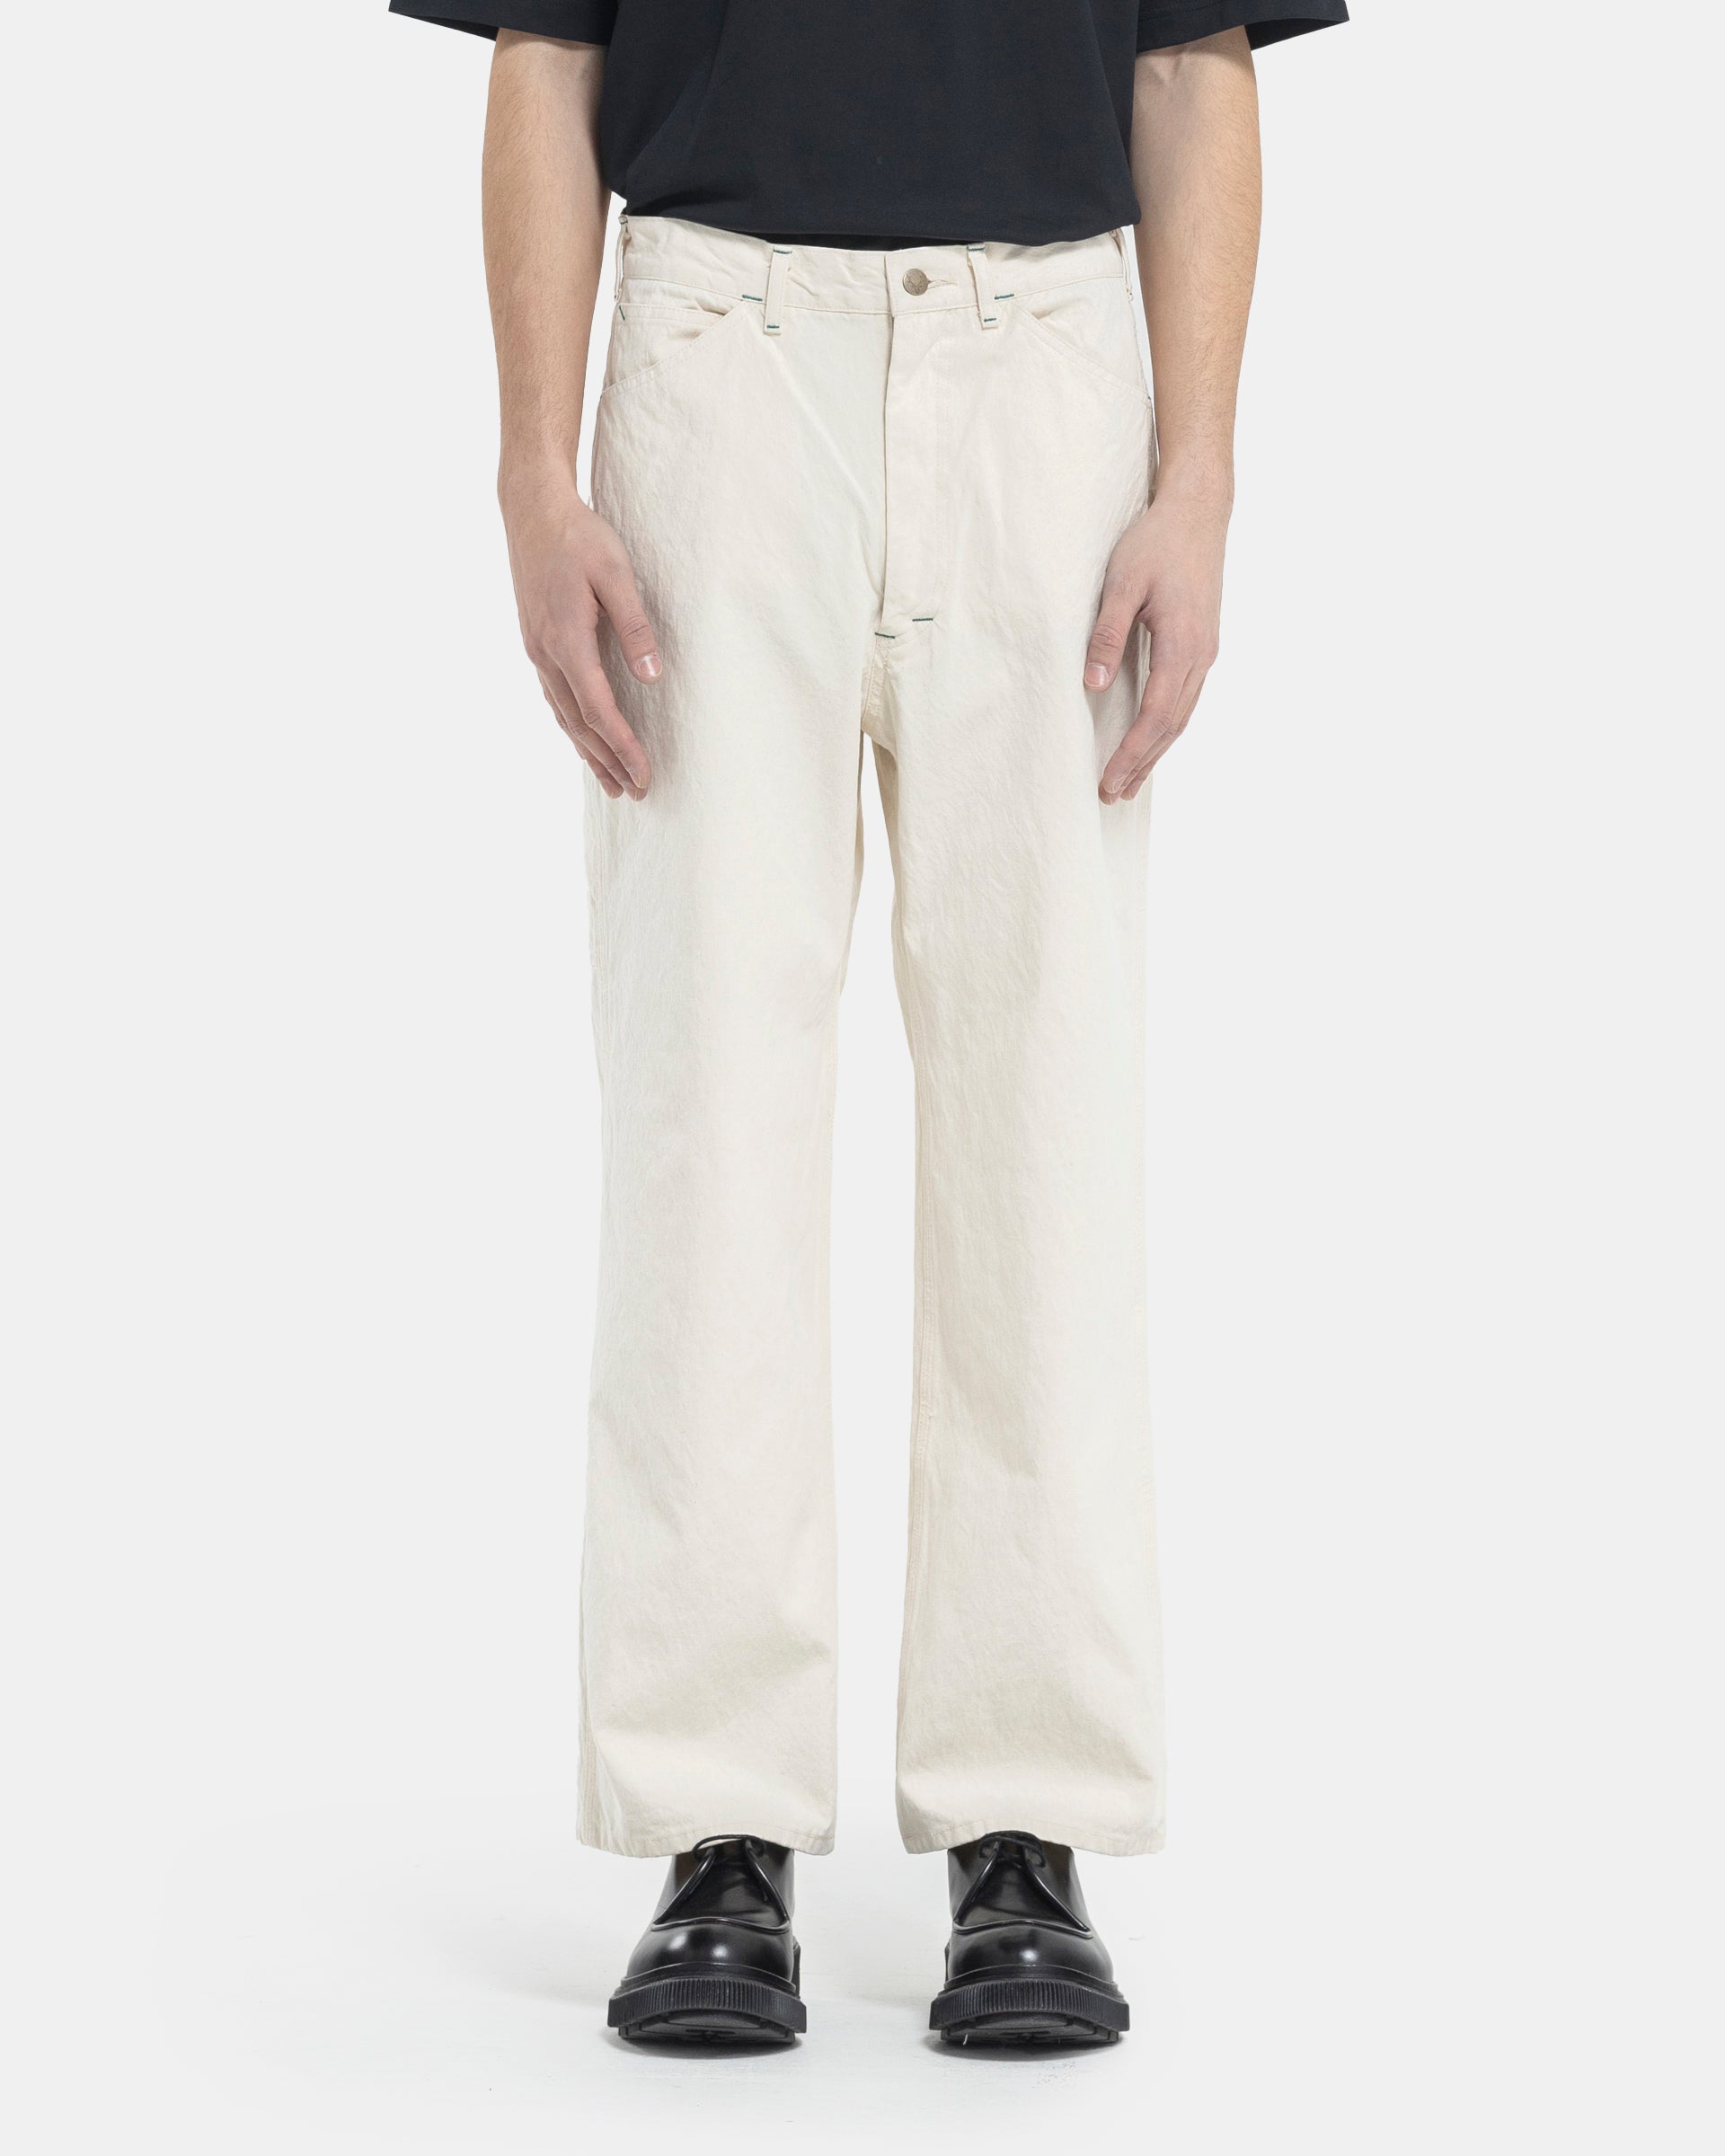 Painter Pant in Off-White